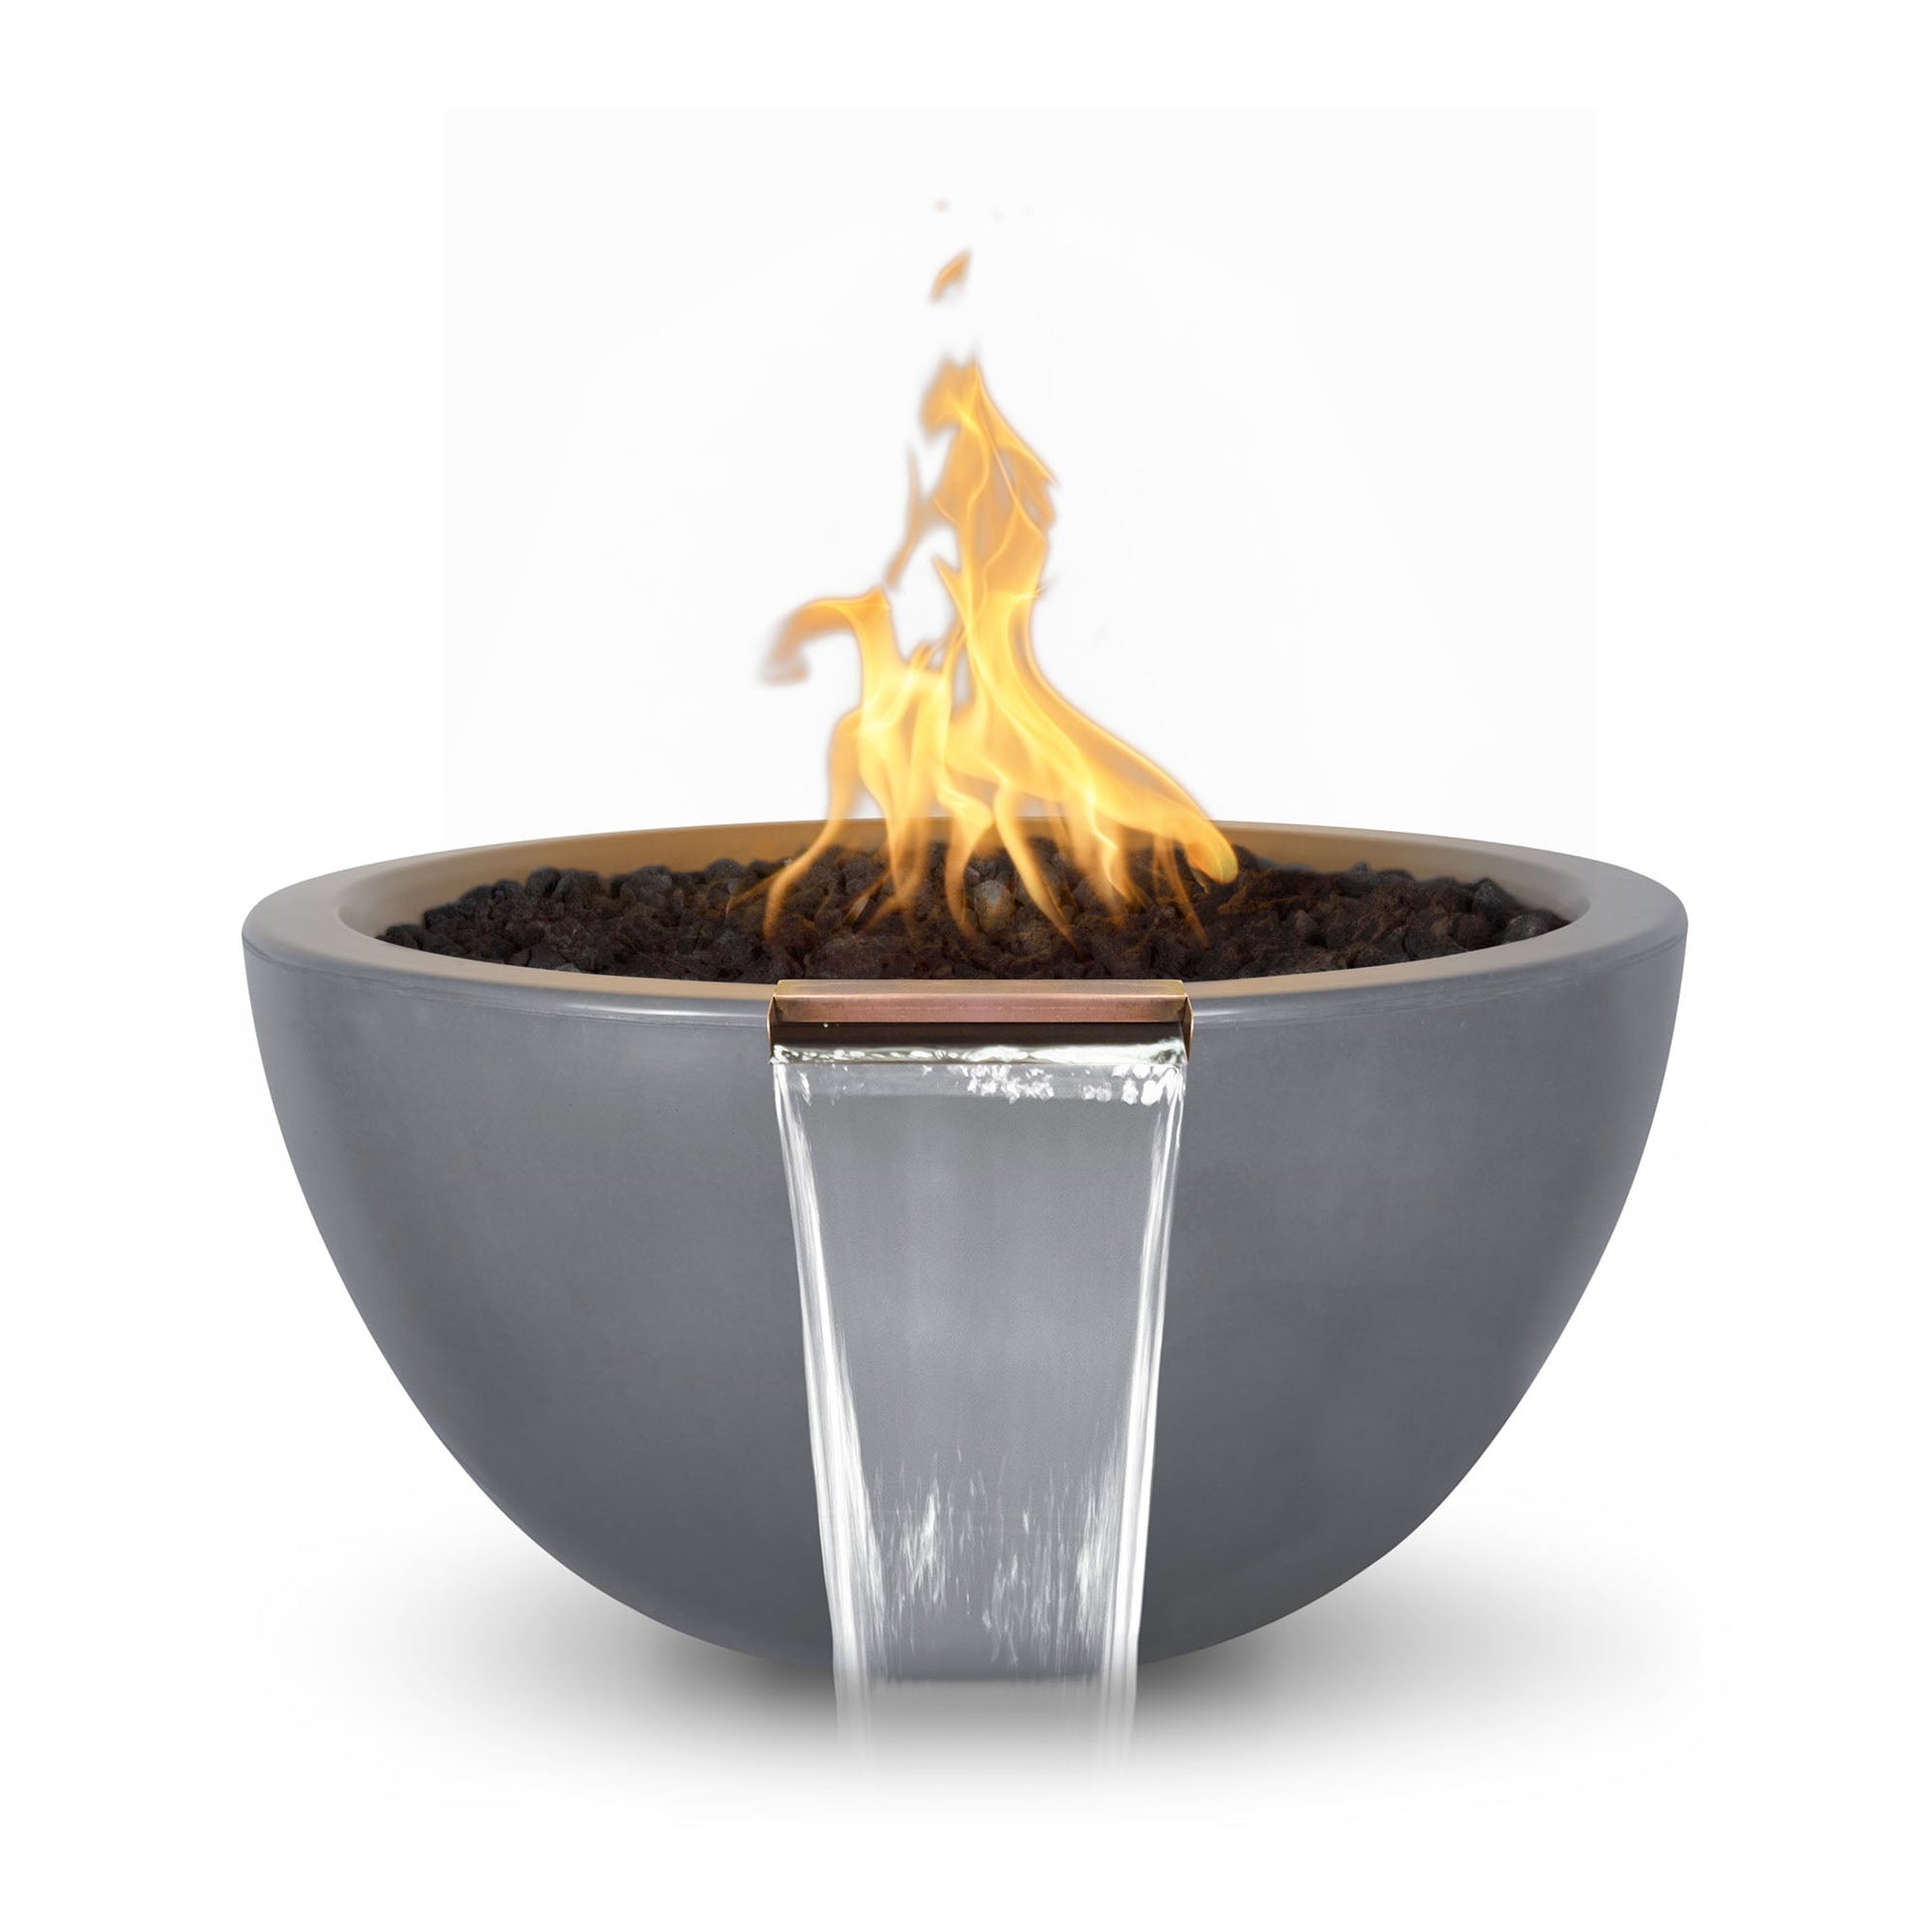 The Outdoor Plus Round Luna 30" Rustic Gray GFRC Concrete Natural Gas Fire & Water Bowl with Match Lit with Flame Sense Ignition